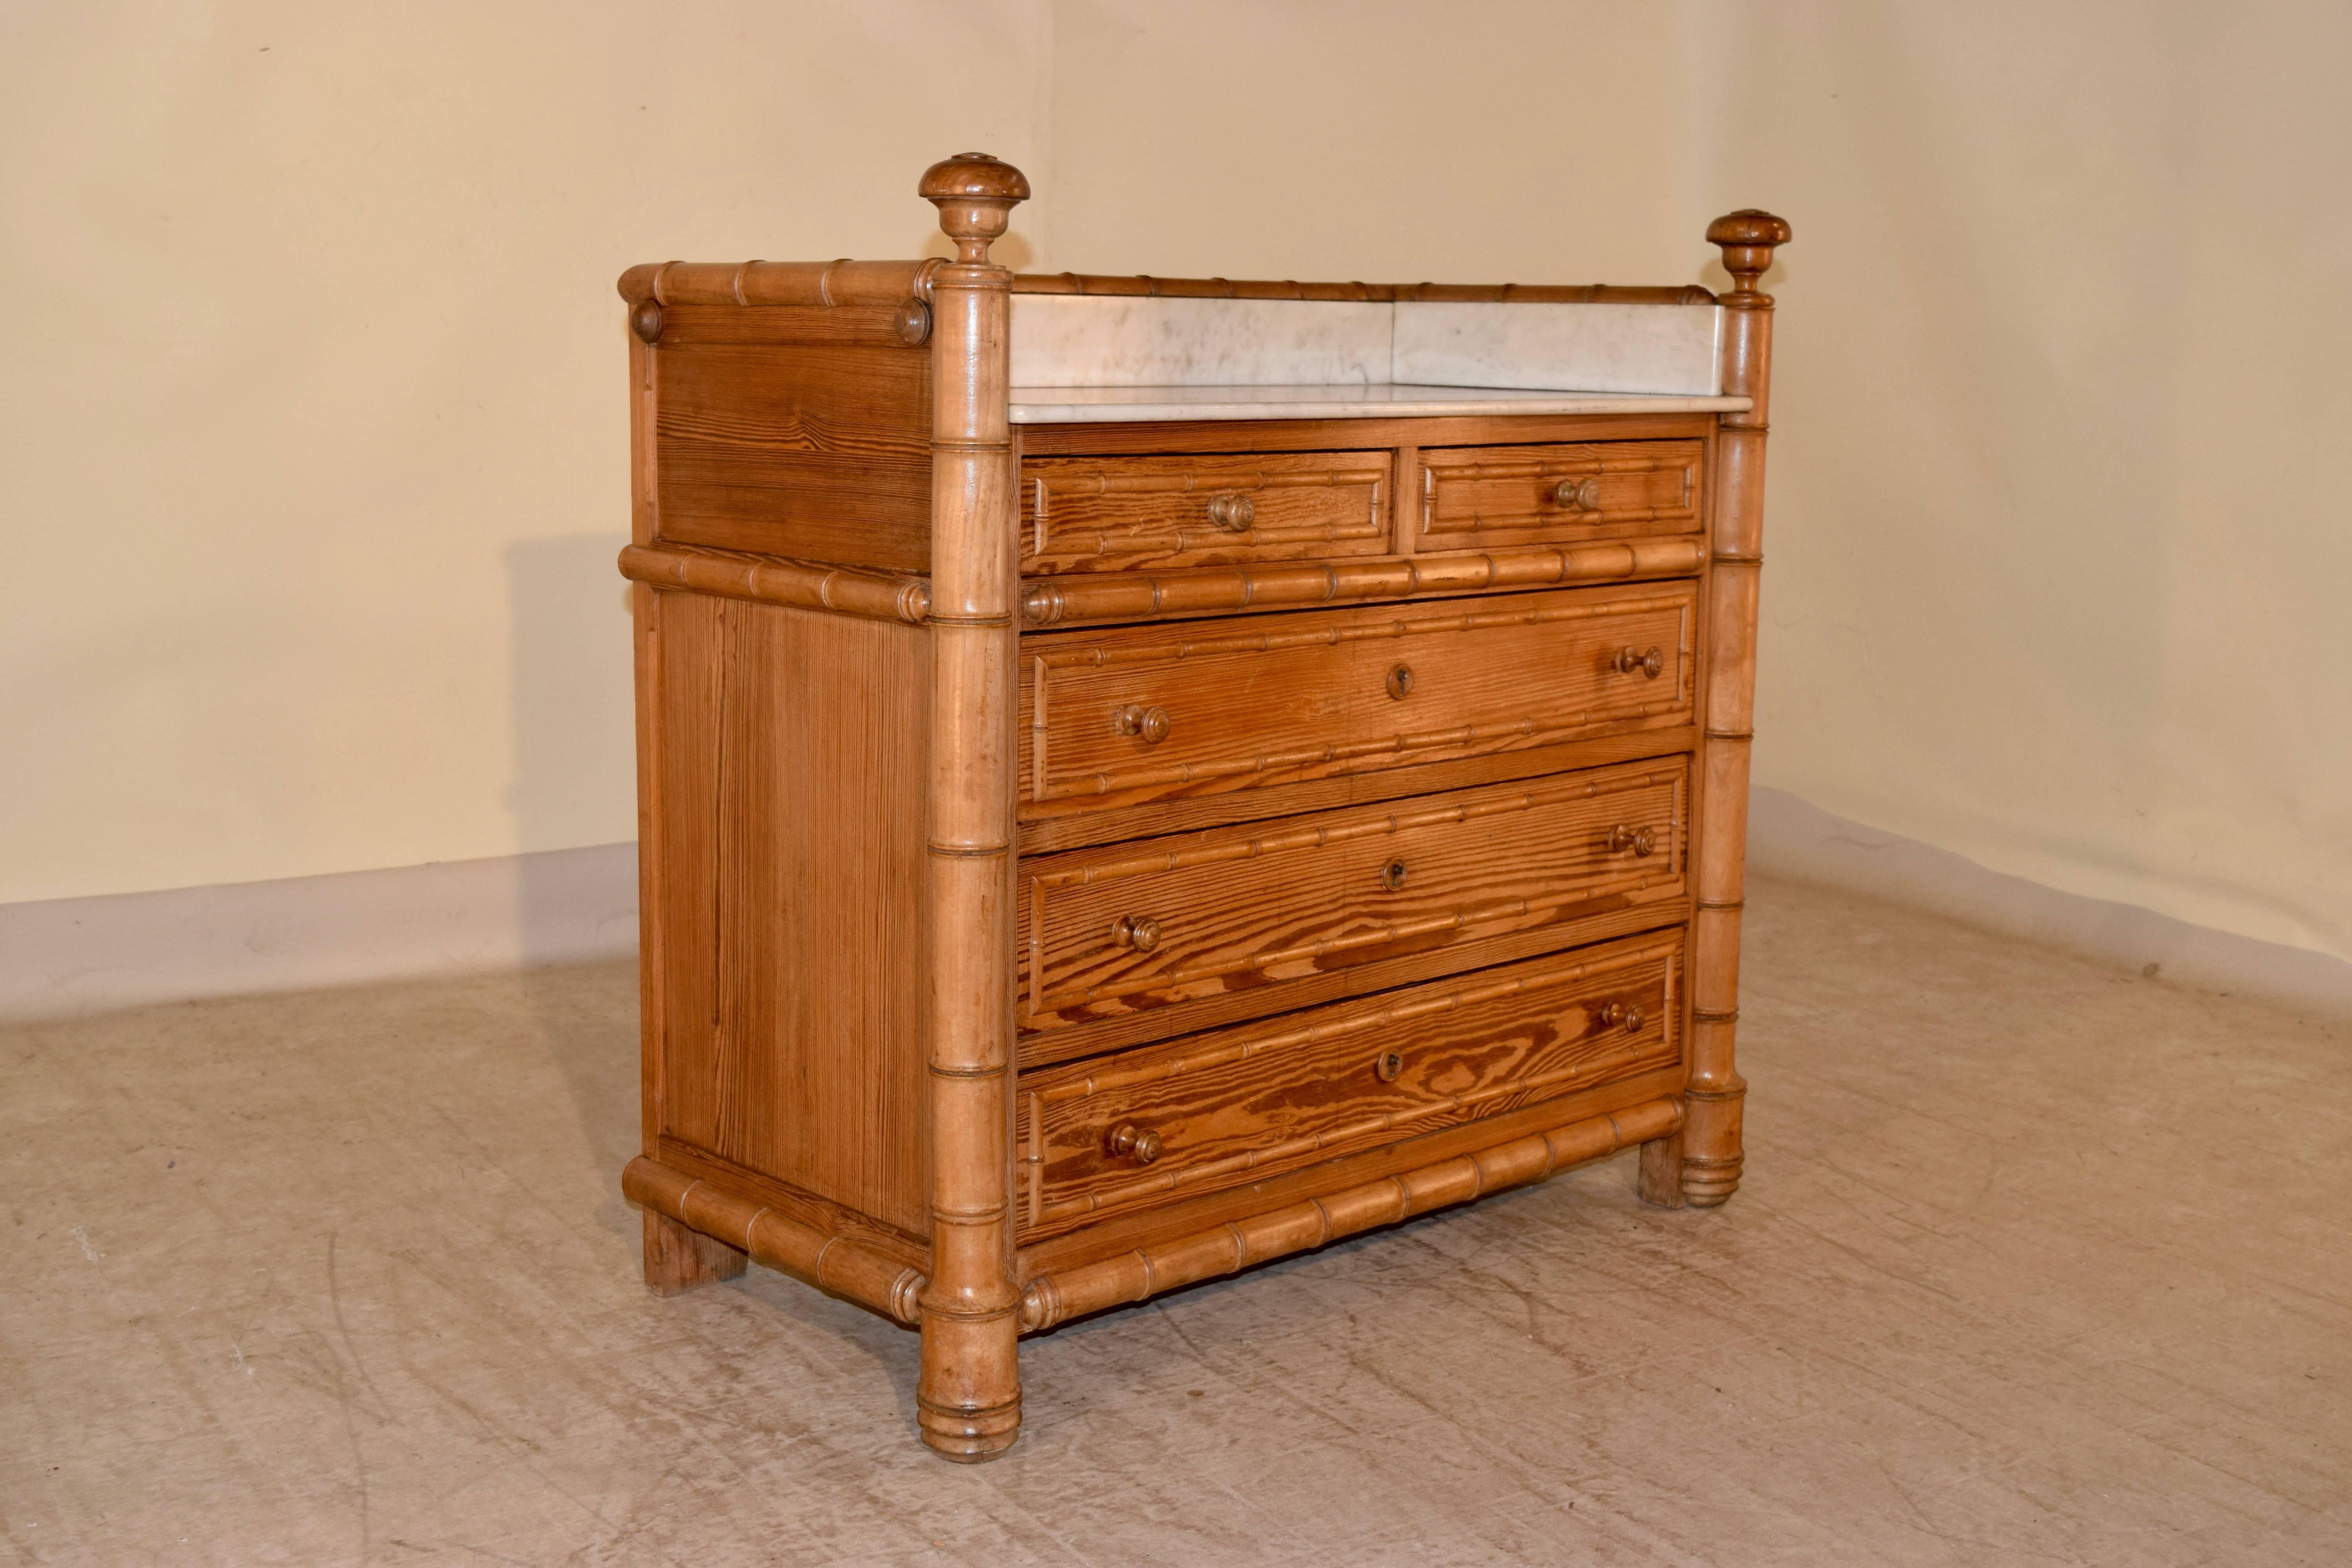 19th century French wash stand decorated with faux bamboo. The top is marble, and is surrounded by faux bamboo style moldings. The sides are paneled and the chest has a two drawer over three-drawer configuration, all banded in faux bamboo moldings.